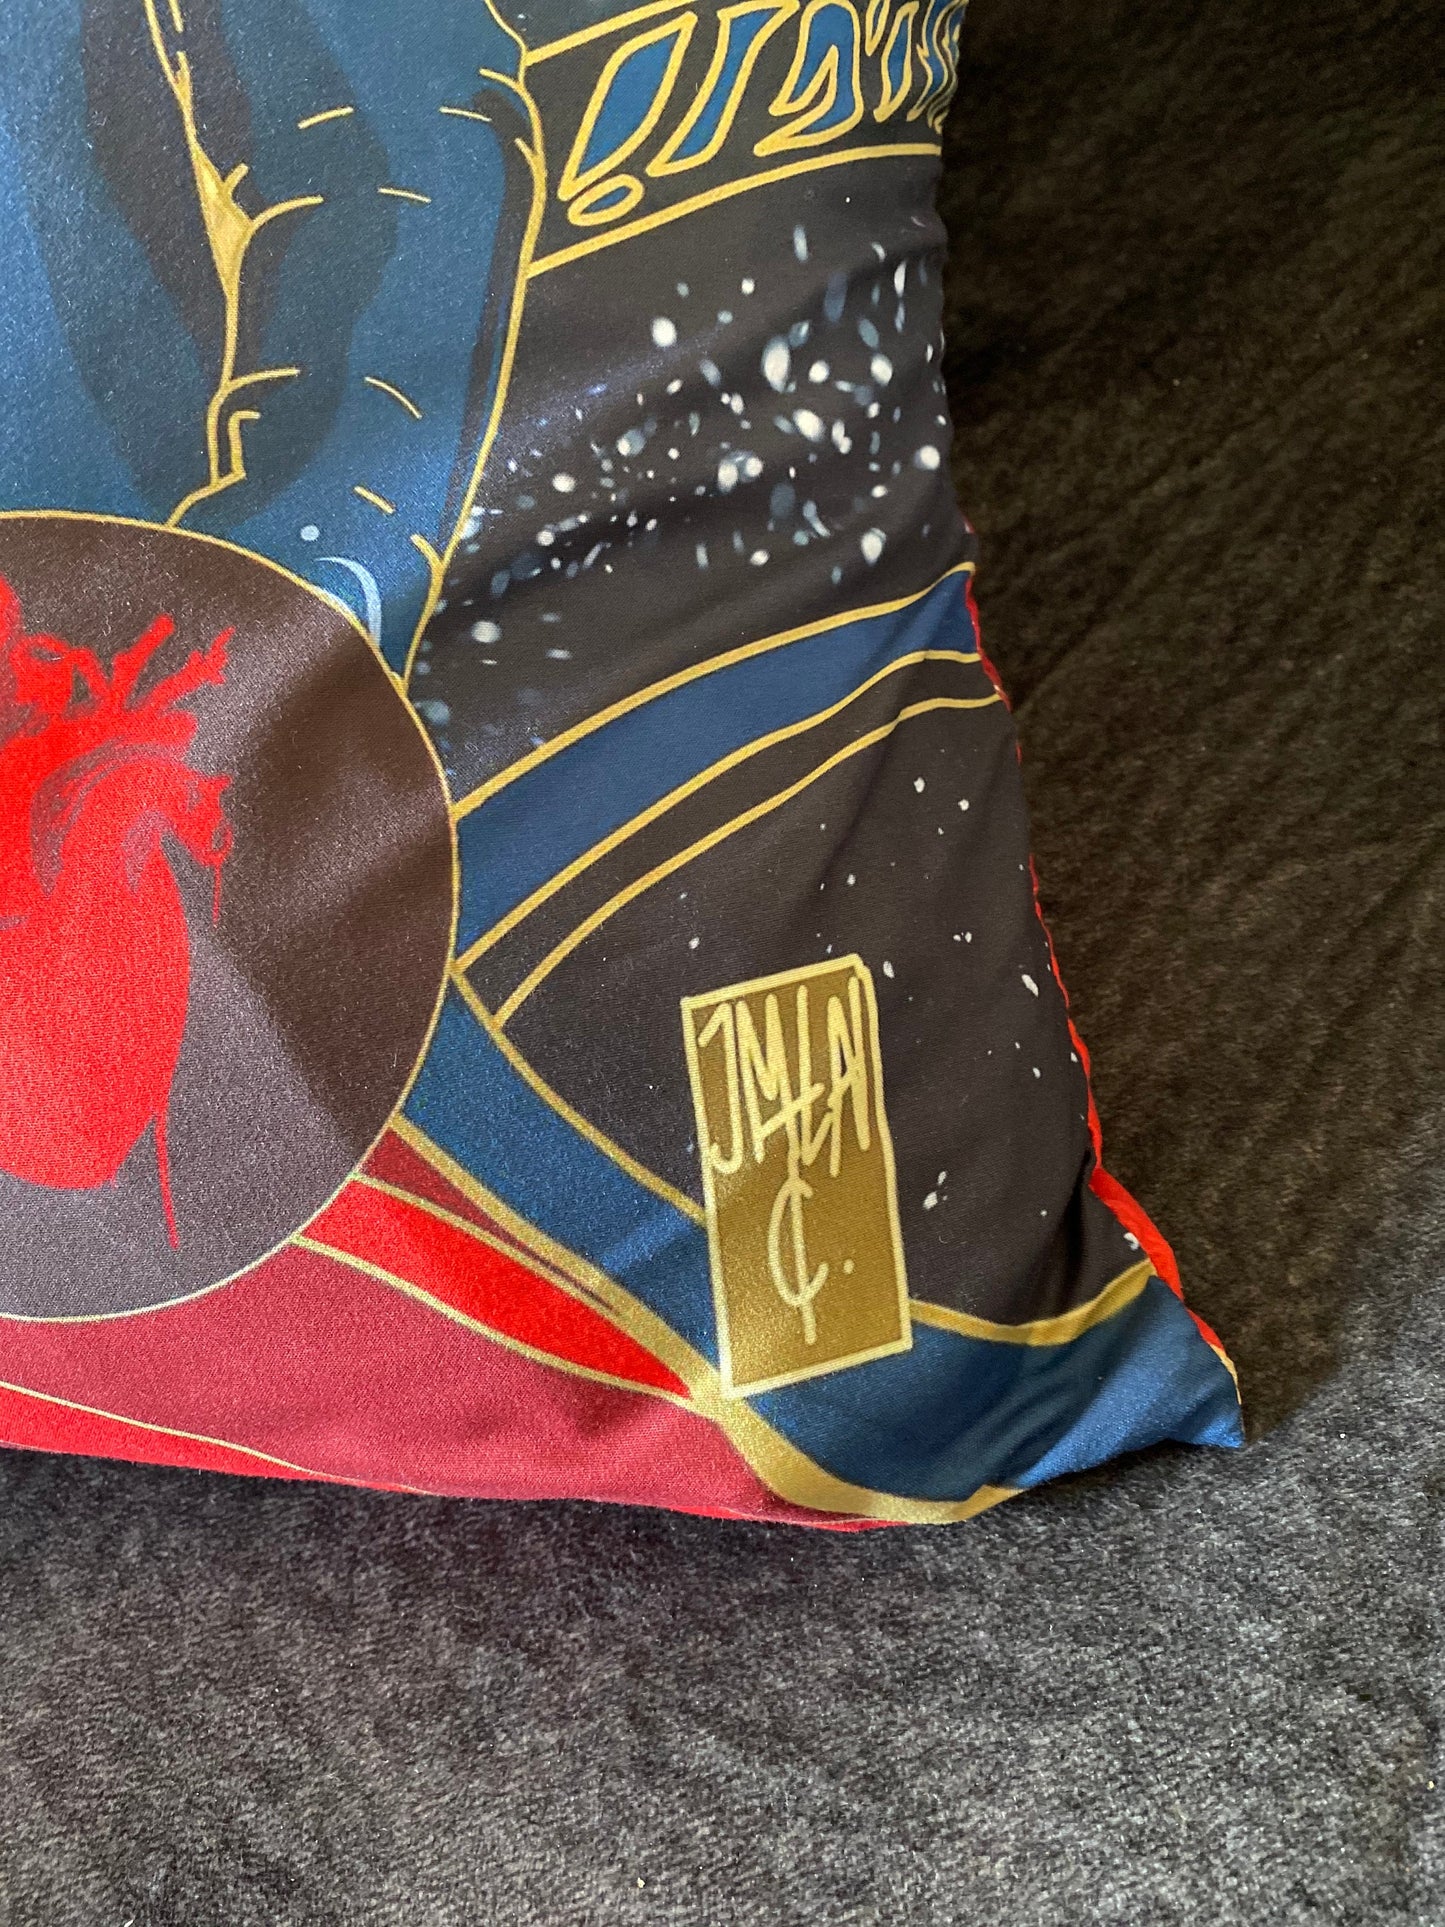 Nina and Matthias Grishaverse Six of Crows Waffle lover Pillow Cover 18x18